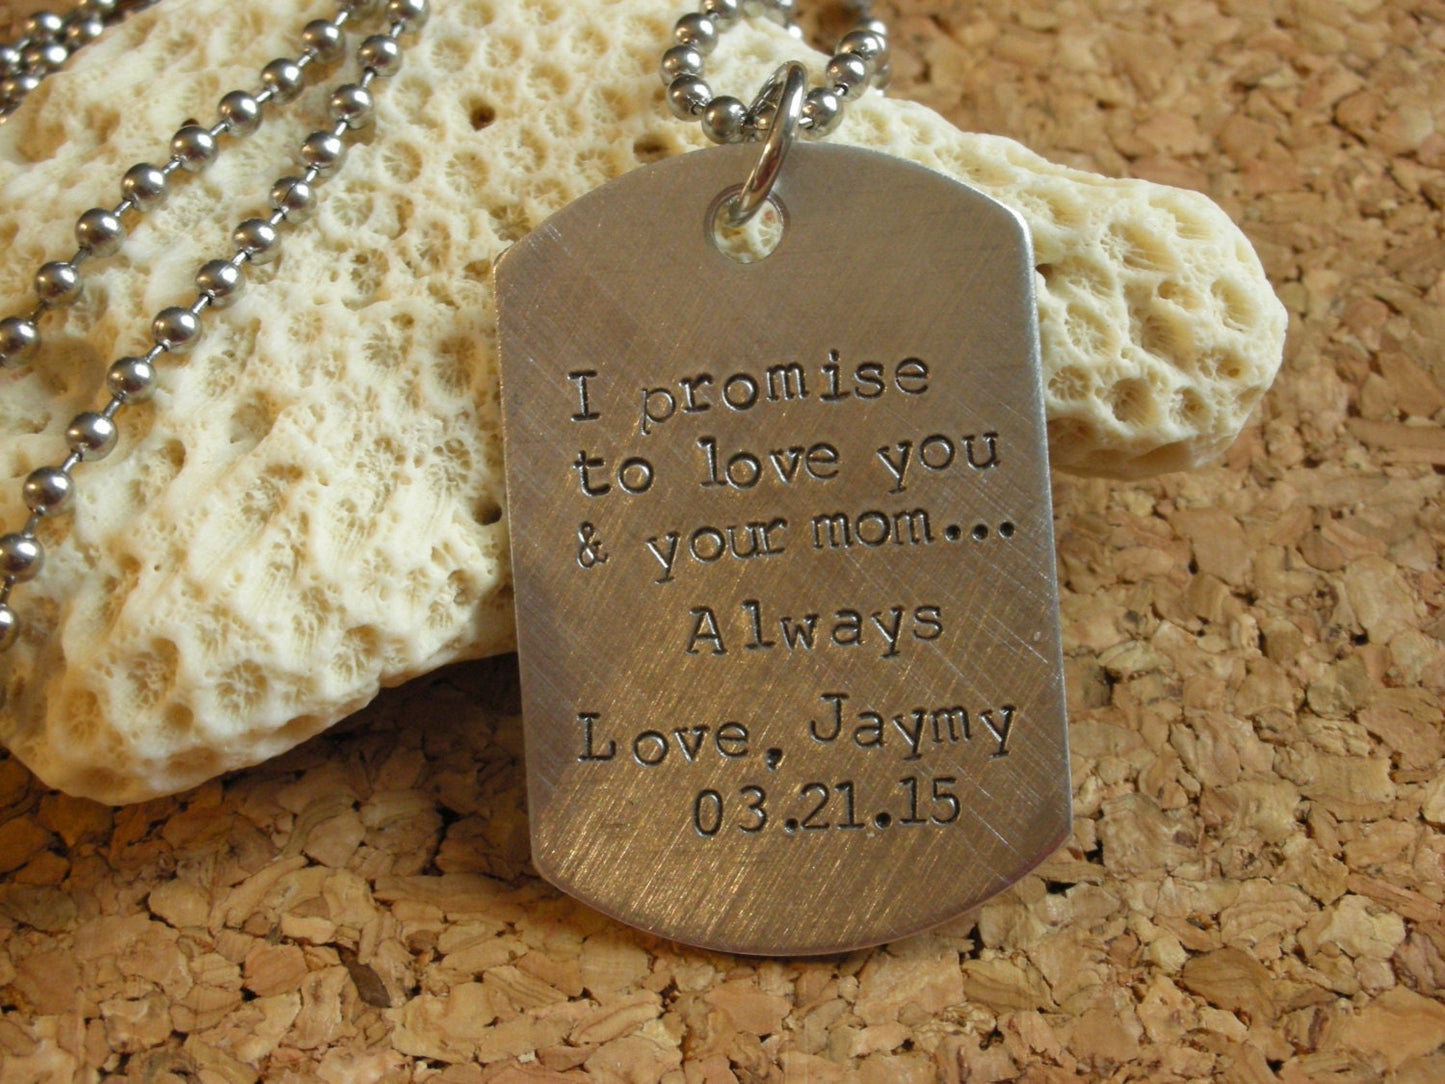 Wedding Gift for Stepson-Stepson Gift from Bride-Stepson Gift from Groom-Blended Family Gift-Dogtags for Wedding-Personalized Dog Tag